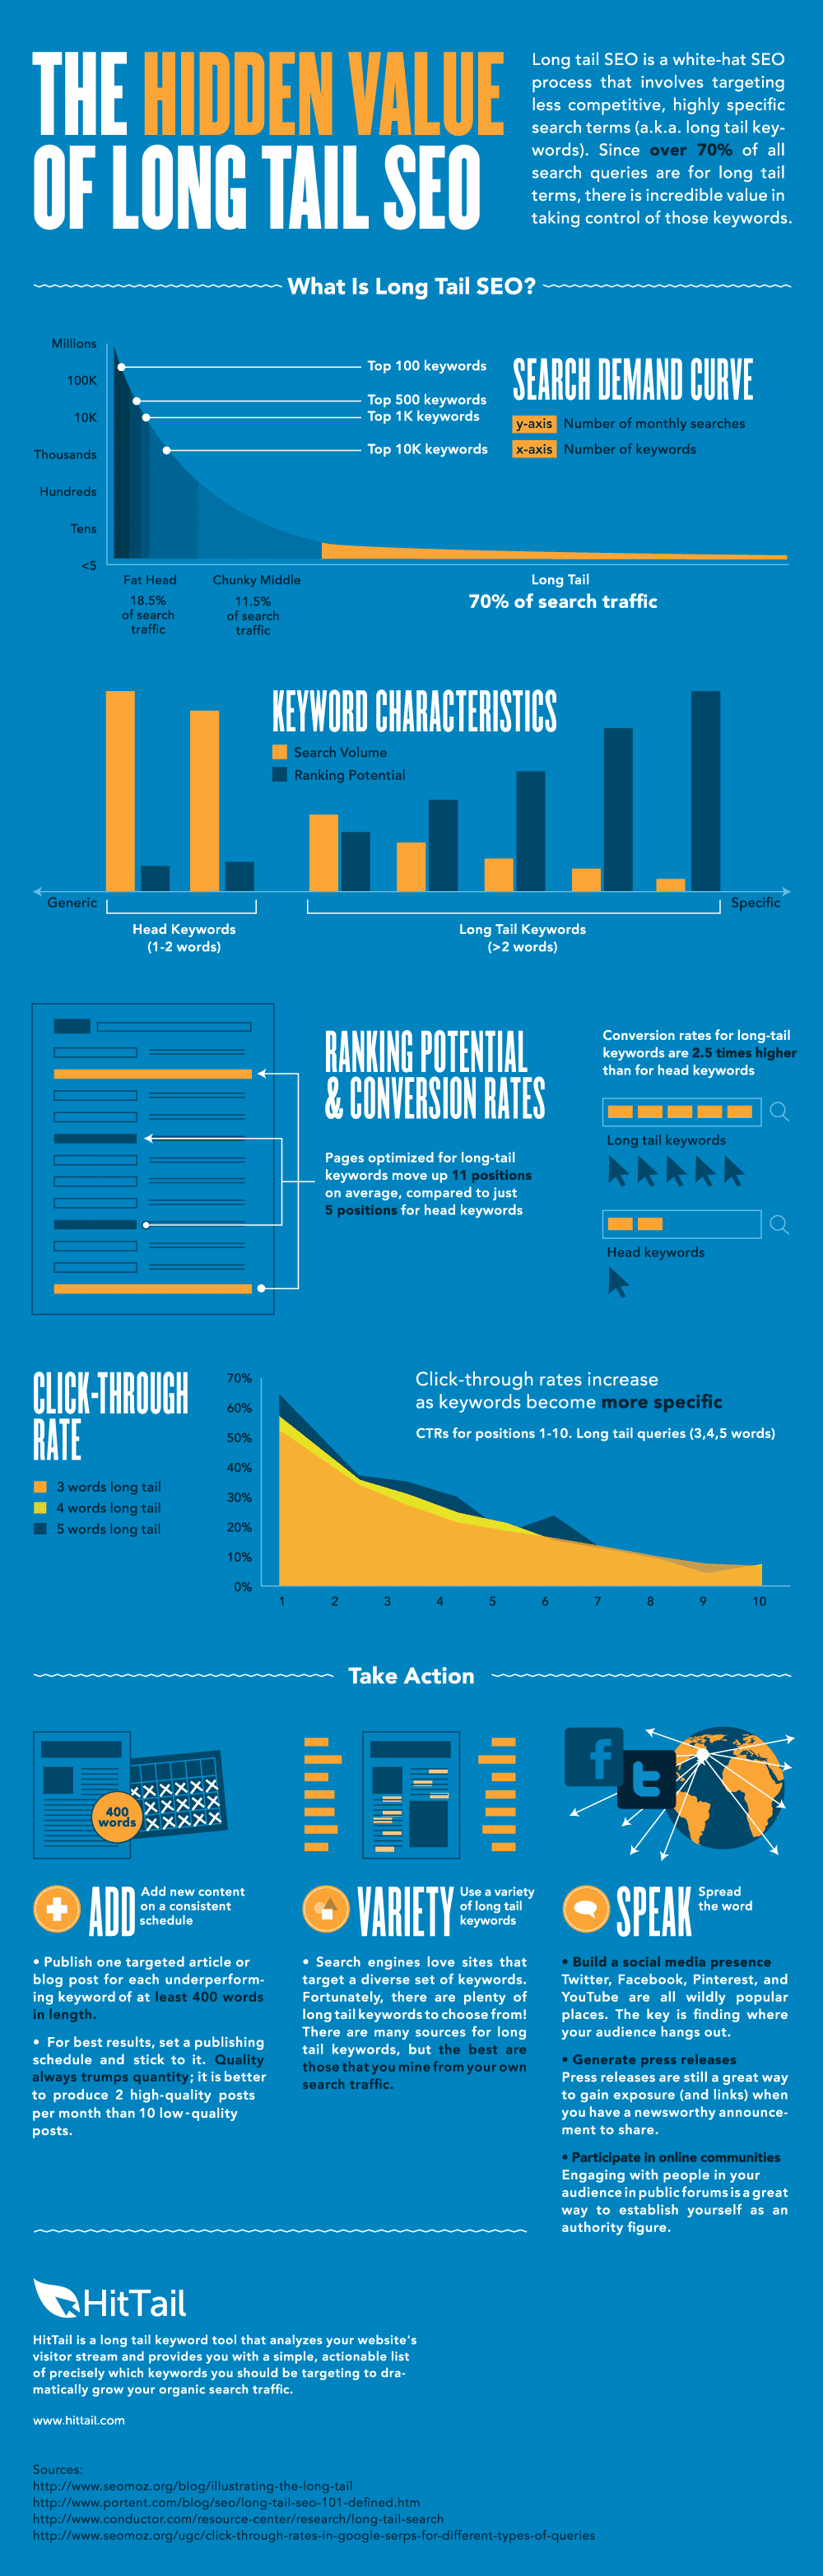 How To Successfully Implement Long Tail SEO [Infographic]